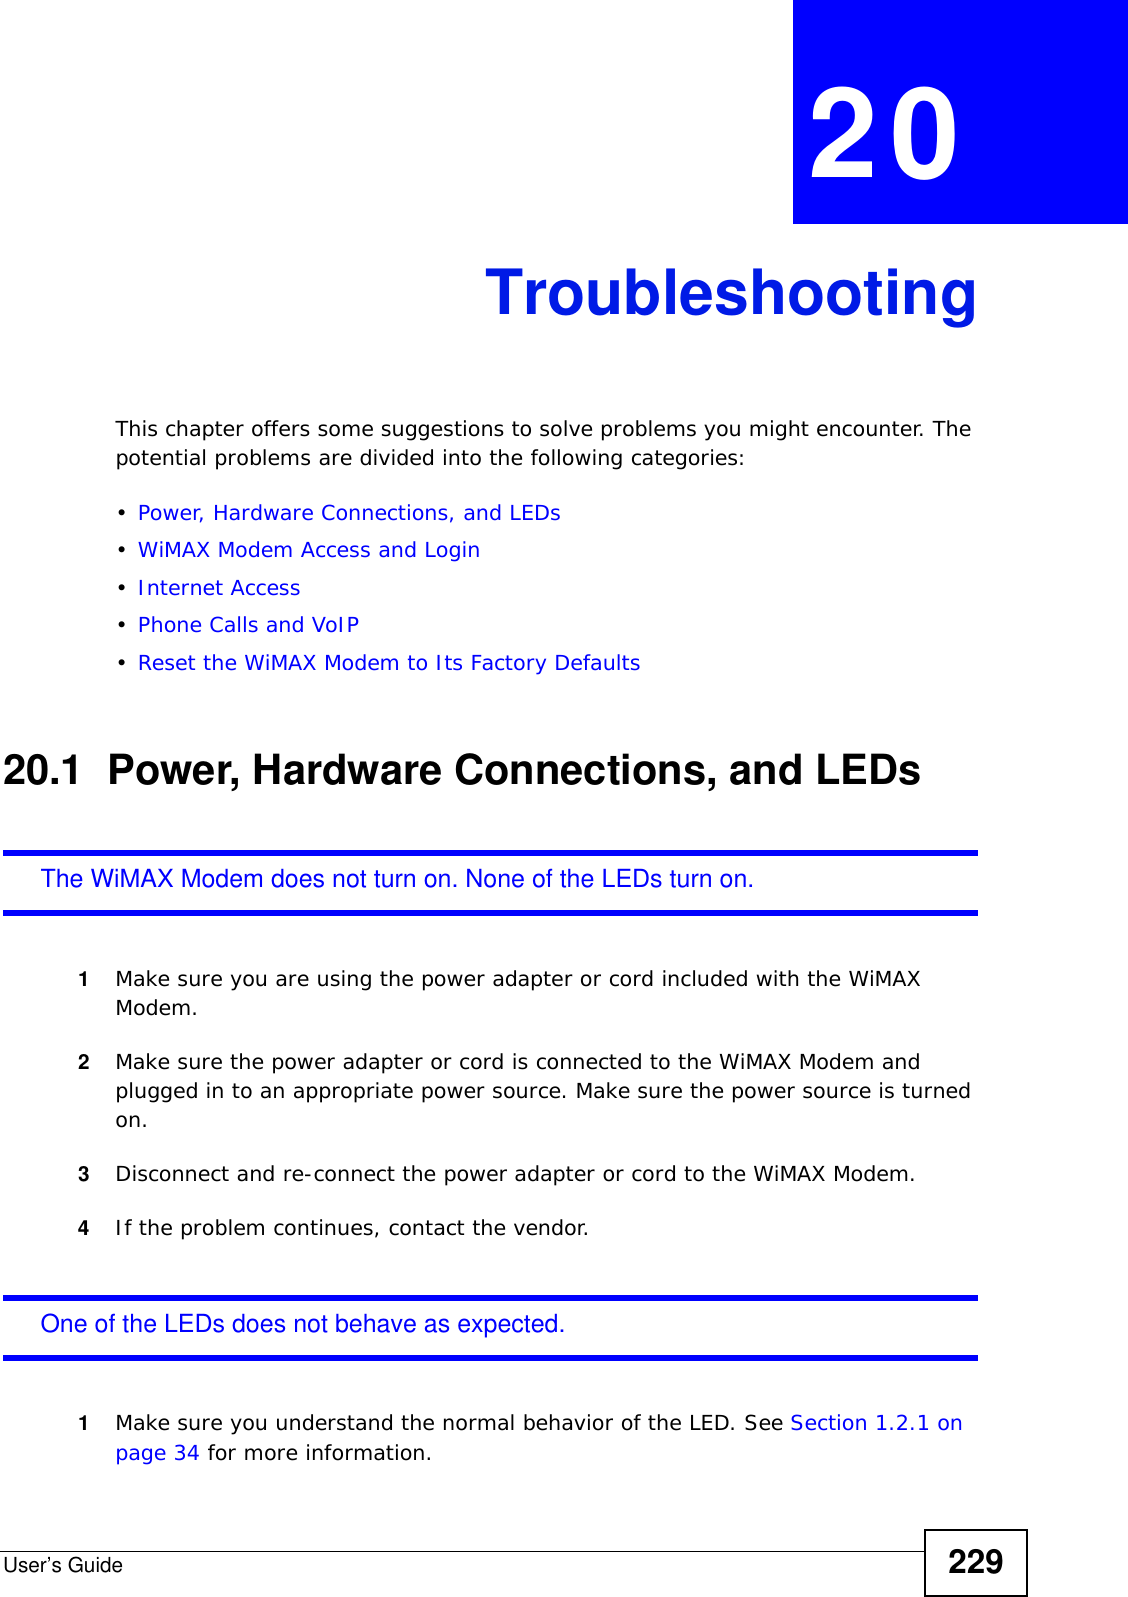 User’s Guide 229CHAPTER  20 TroubleshootingThis chapter offers some suggestions to solve problems you might encounter. The potential problems are divided into the following categories:•Power, Hardware Connections, and LEDs•WiMAX Modem Access and Login•Internet Access•Phone Calls and VoIP•Reset the WiMAX Modem to Its Factory Defaults20.1  Power, Hardware Connections, and LEDsThe WiMAX Modem does not turn on. None of the LEDs turn on.1Make sure you are using the power adapter or cord included with the WiMAX Modem.2Make sure the power adapter or cord is connected to the WiMAX Modem and plugged in to an appropriate power source. Make sure the power source is turned on.3Disconnect and re-connect the power adapter or cord to the WiMAX Modem.4If the problem continues, contact the vendor.One of the LEDs does not behave as expected.1Make sure you understand the normal behavior of the LED. See Section 1.2.1 on page 34 for more information.